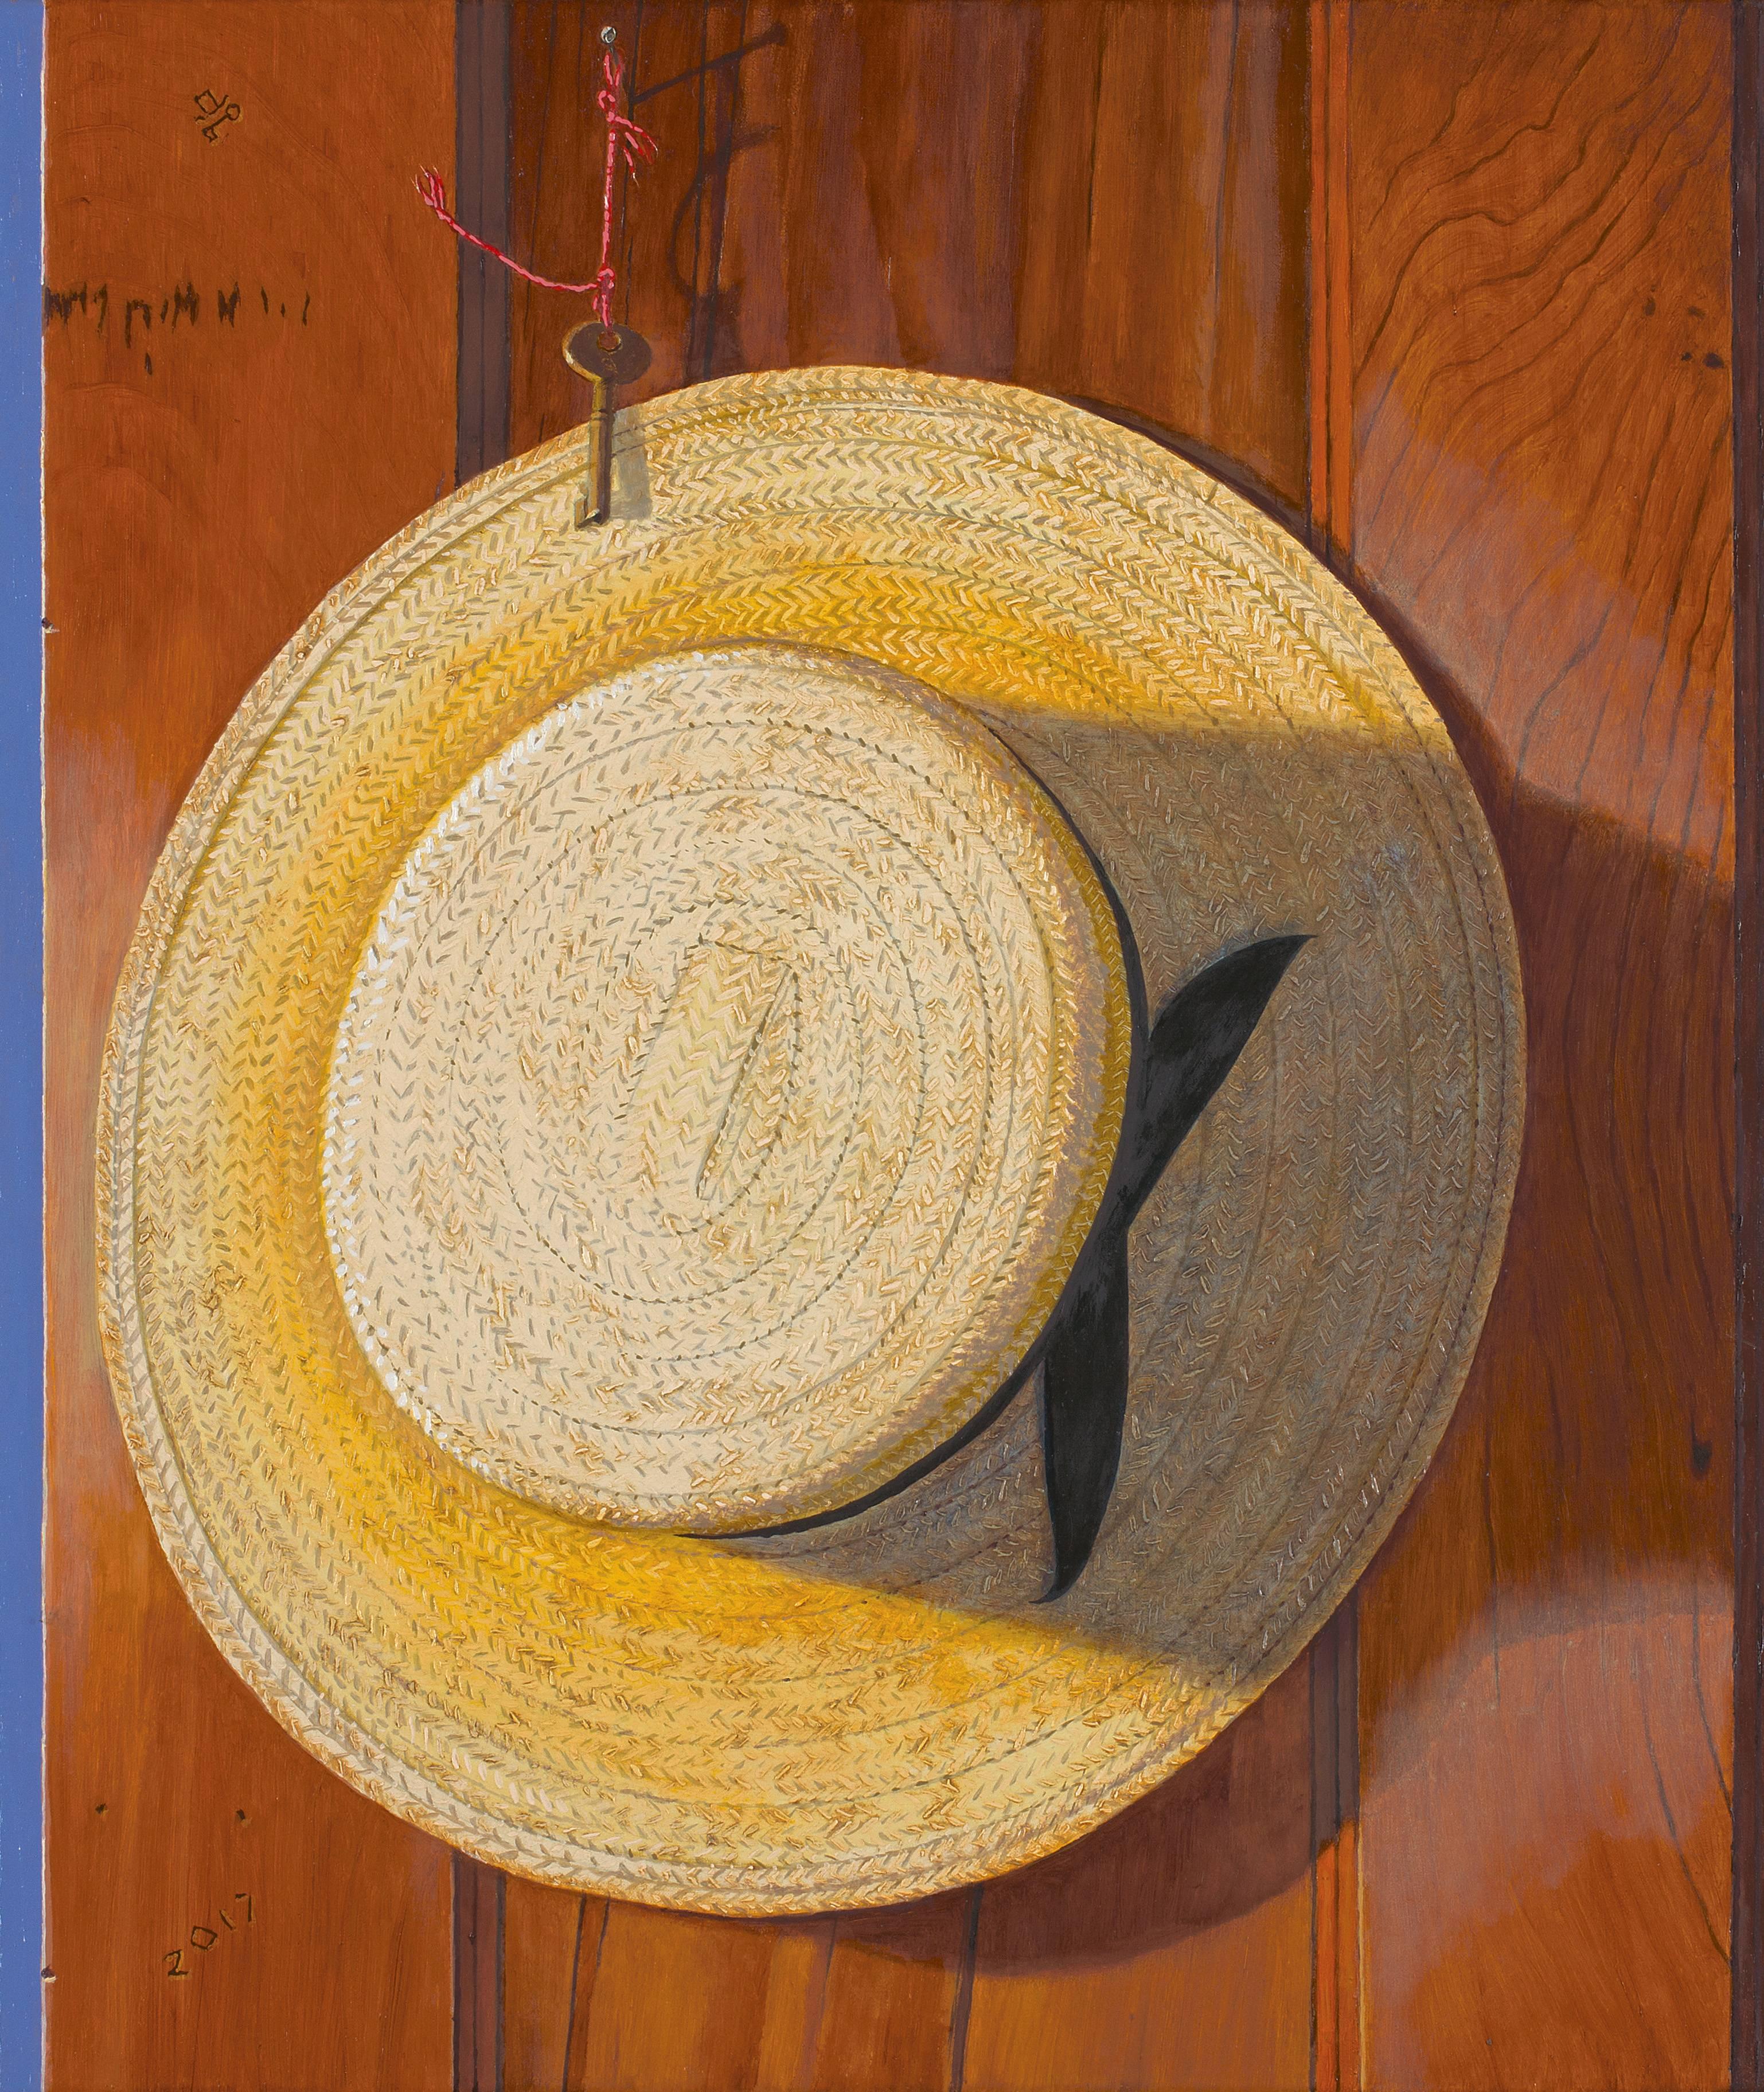 Walter Hatke Still-Life Painting - THE BROTHER'S, straw hat hanging on wooden wall, photo-realism, brown, yellow